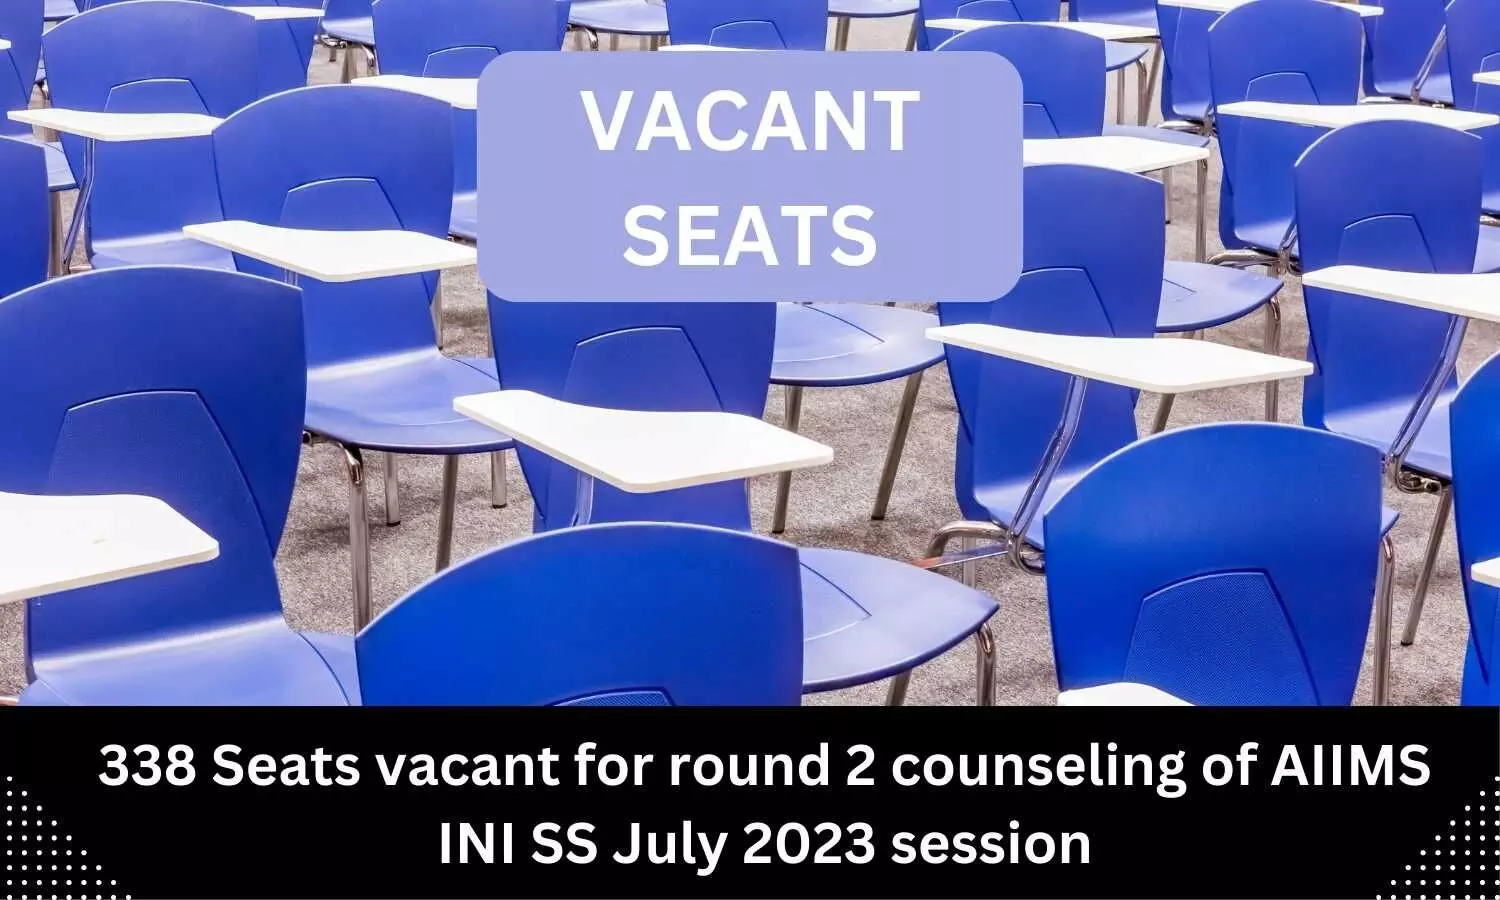 AIIMS INI SS July 2023 session: 338 seats vacant for round 2 counseling